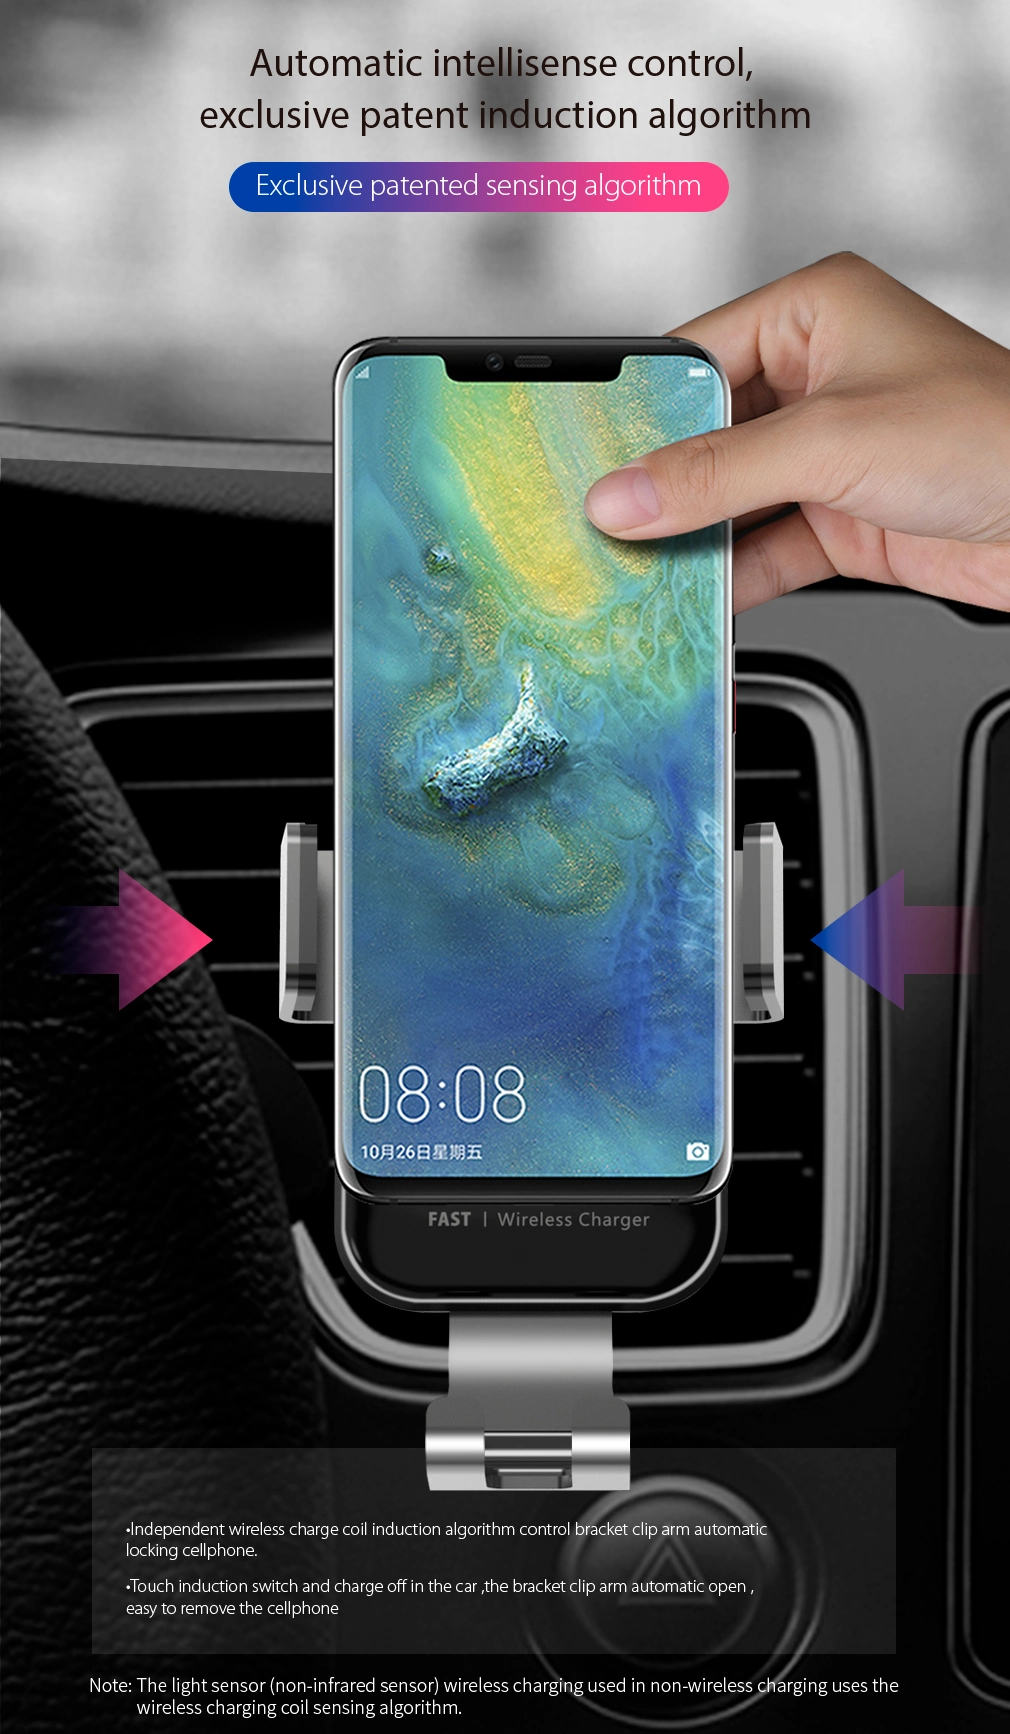 Wireless Car Charger iPhone 11 PRO Max USB Car Charger Wireless Car Mount Charger with Auto Clamping